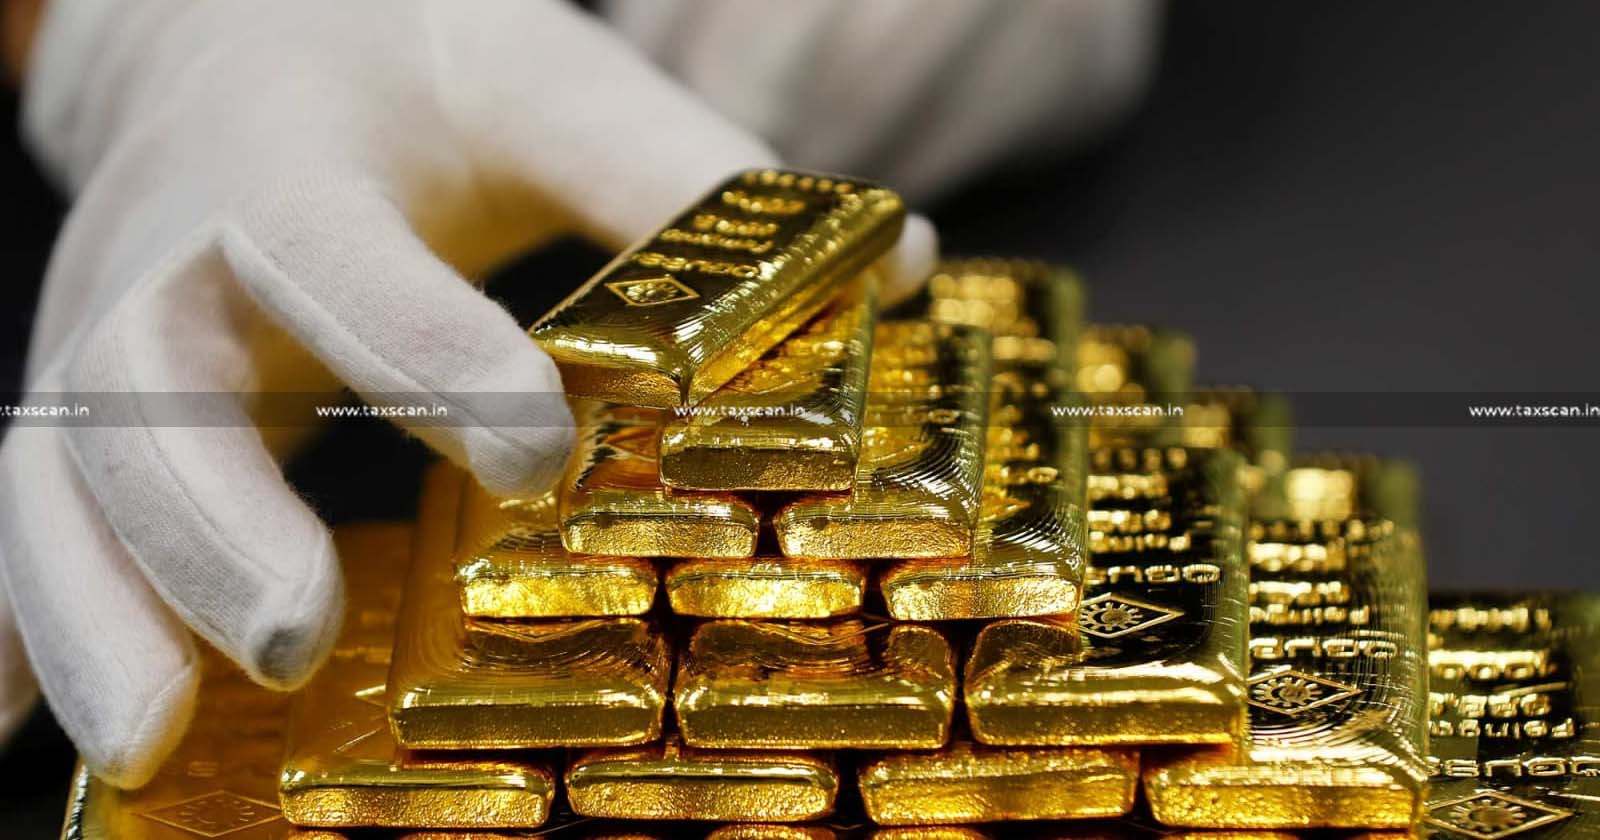 Mere - Equivalent - Purity - Foreign- Gold - Criteria - Hold- Melted- Gold - Gold - Foreign -Origin-CESTAT-TAXSCAN